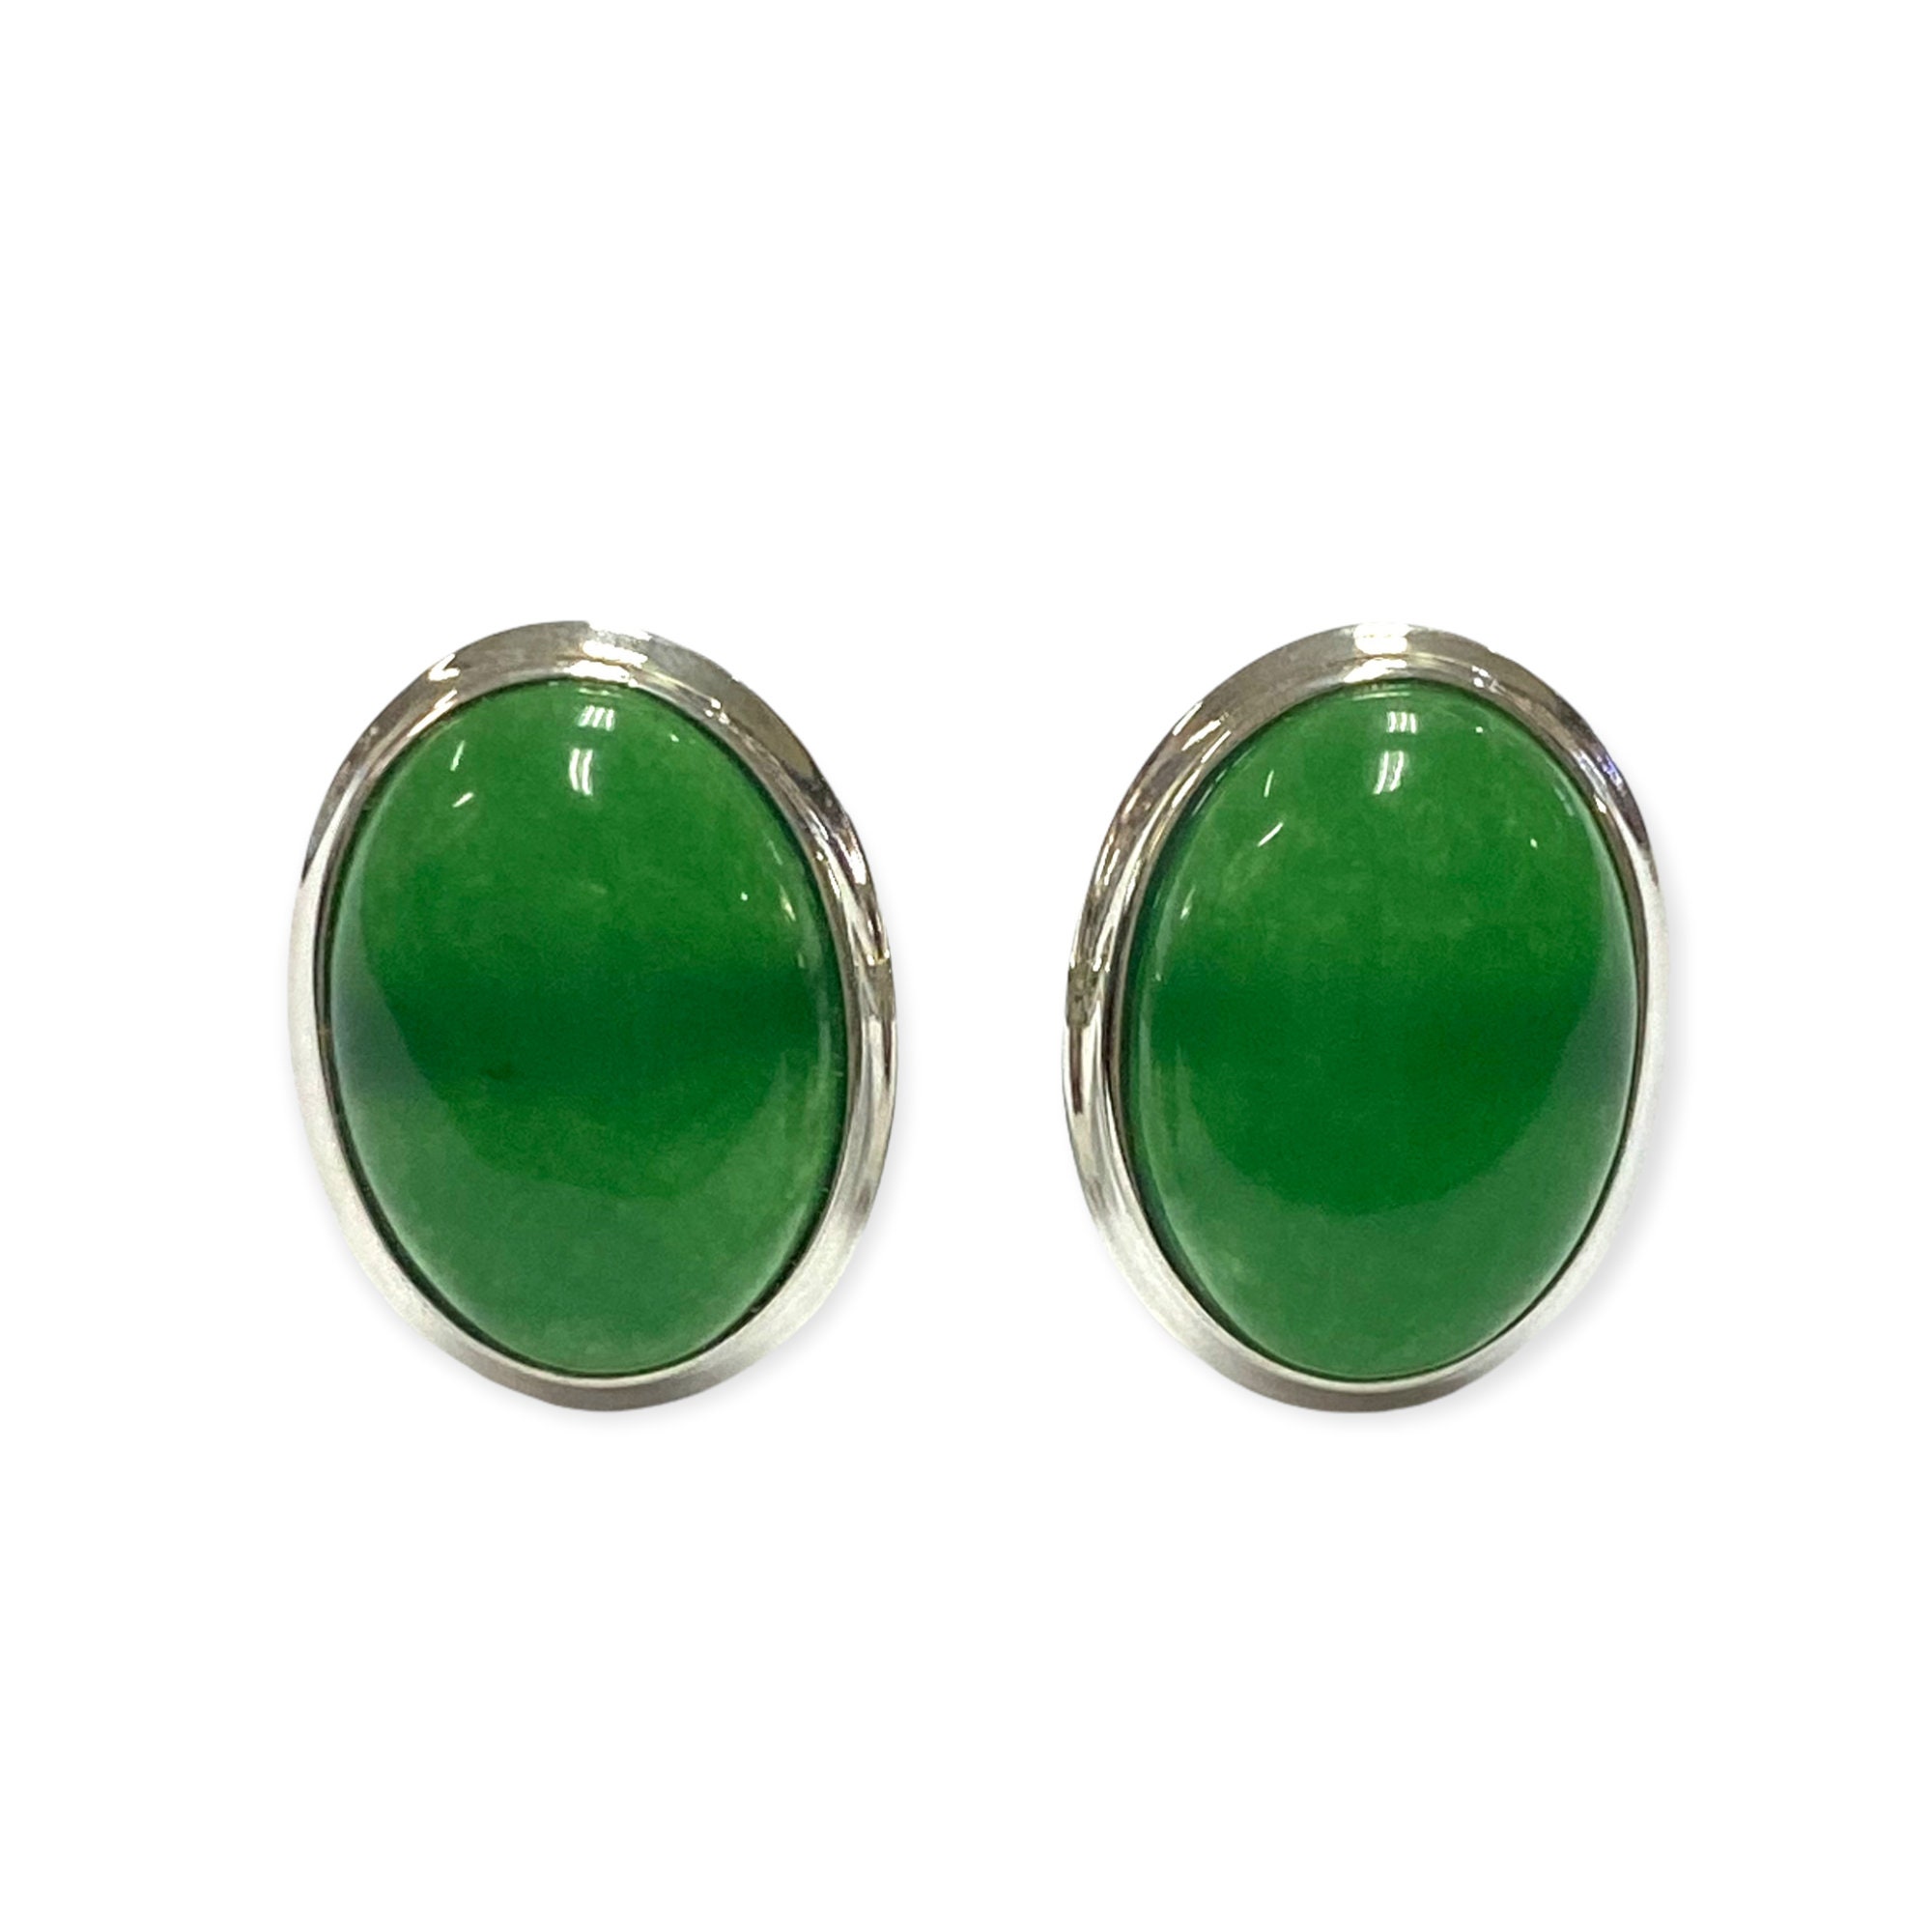 Silver Day Sterling 925 - Fathers Etsy Cufflinks Jade Gift Victorian Oval Green Style Mens